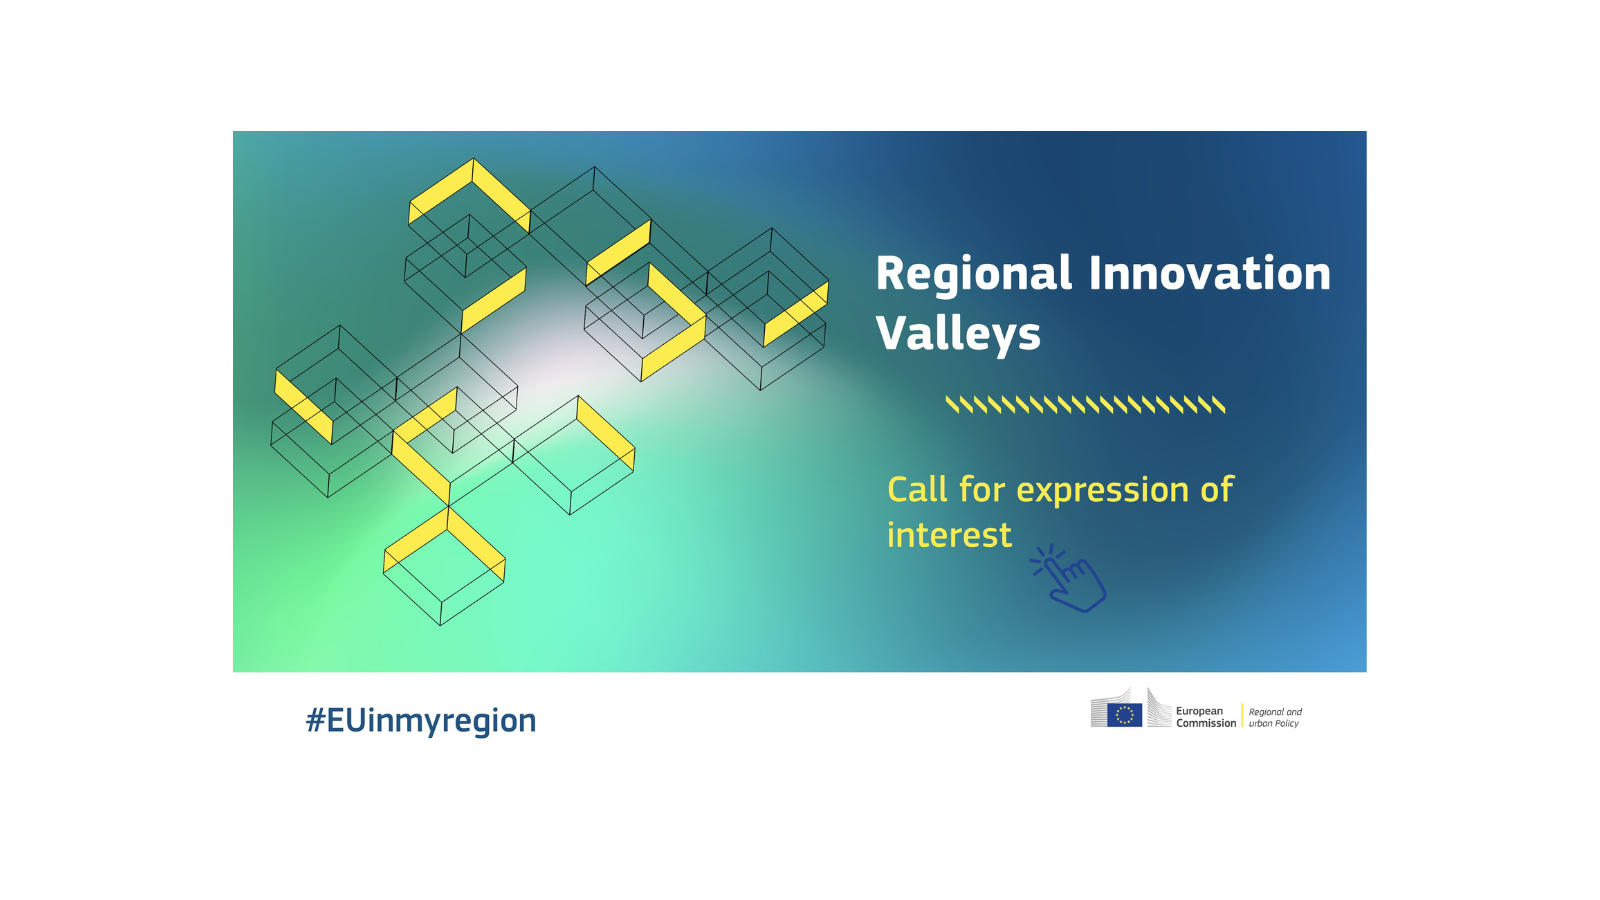 Call for Expression of Interest for Regional Innovation Valleys launched